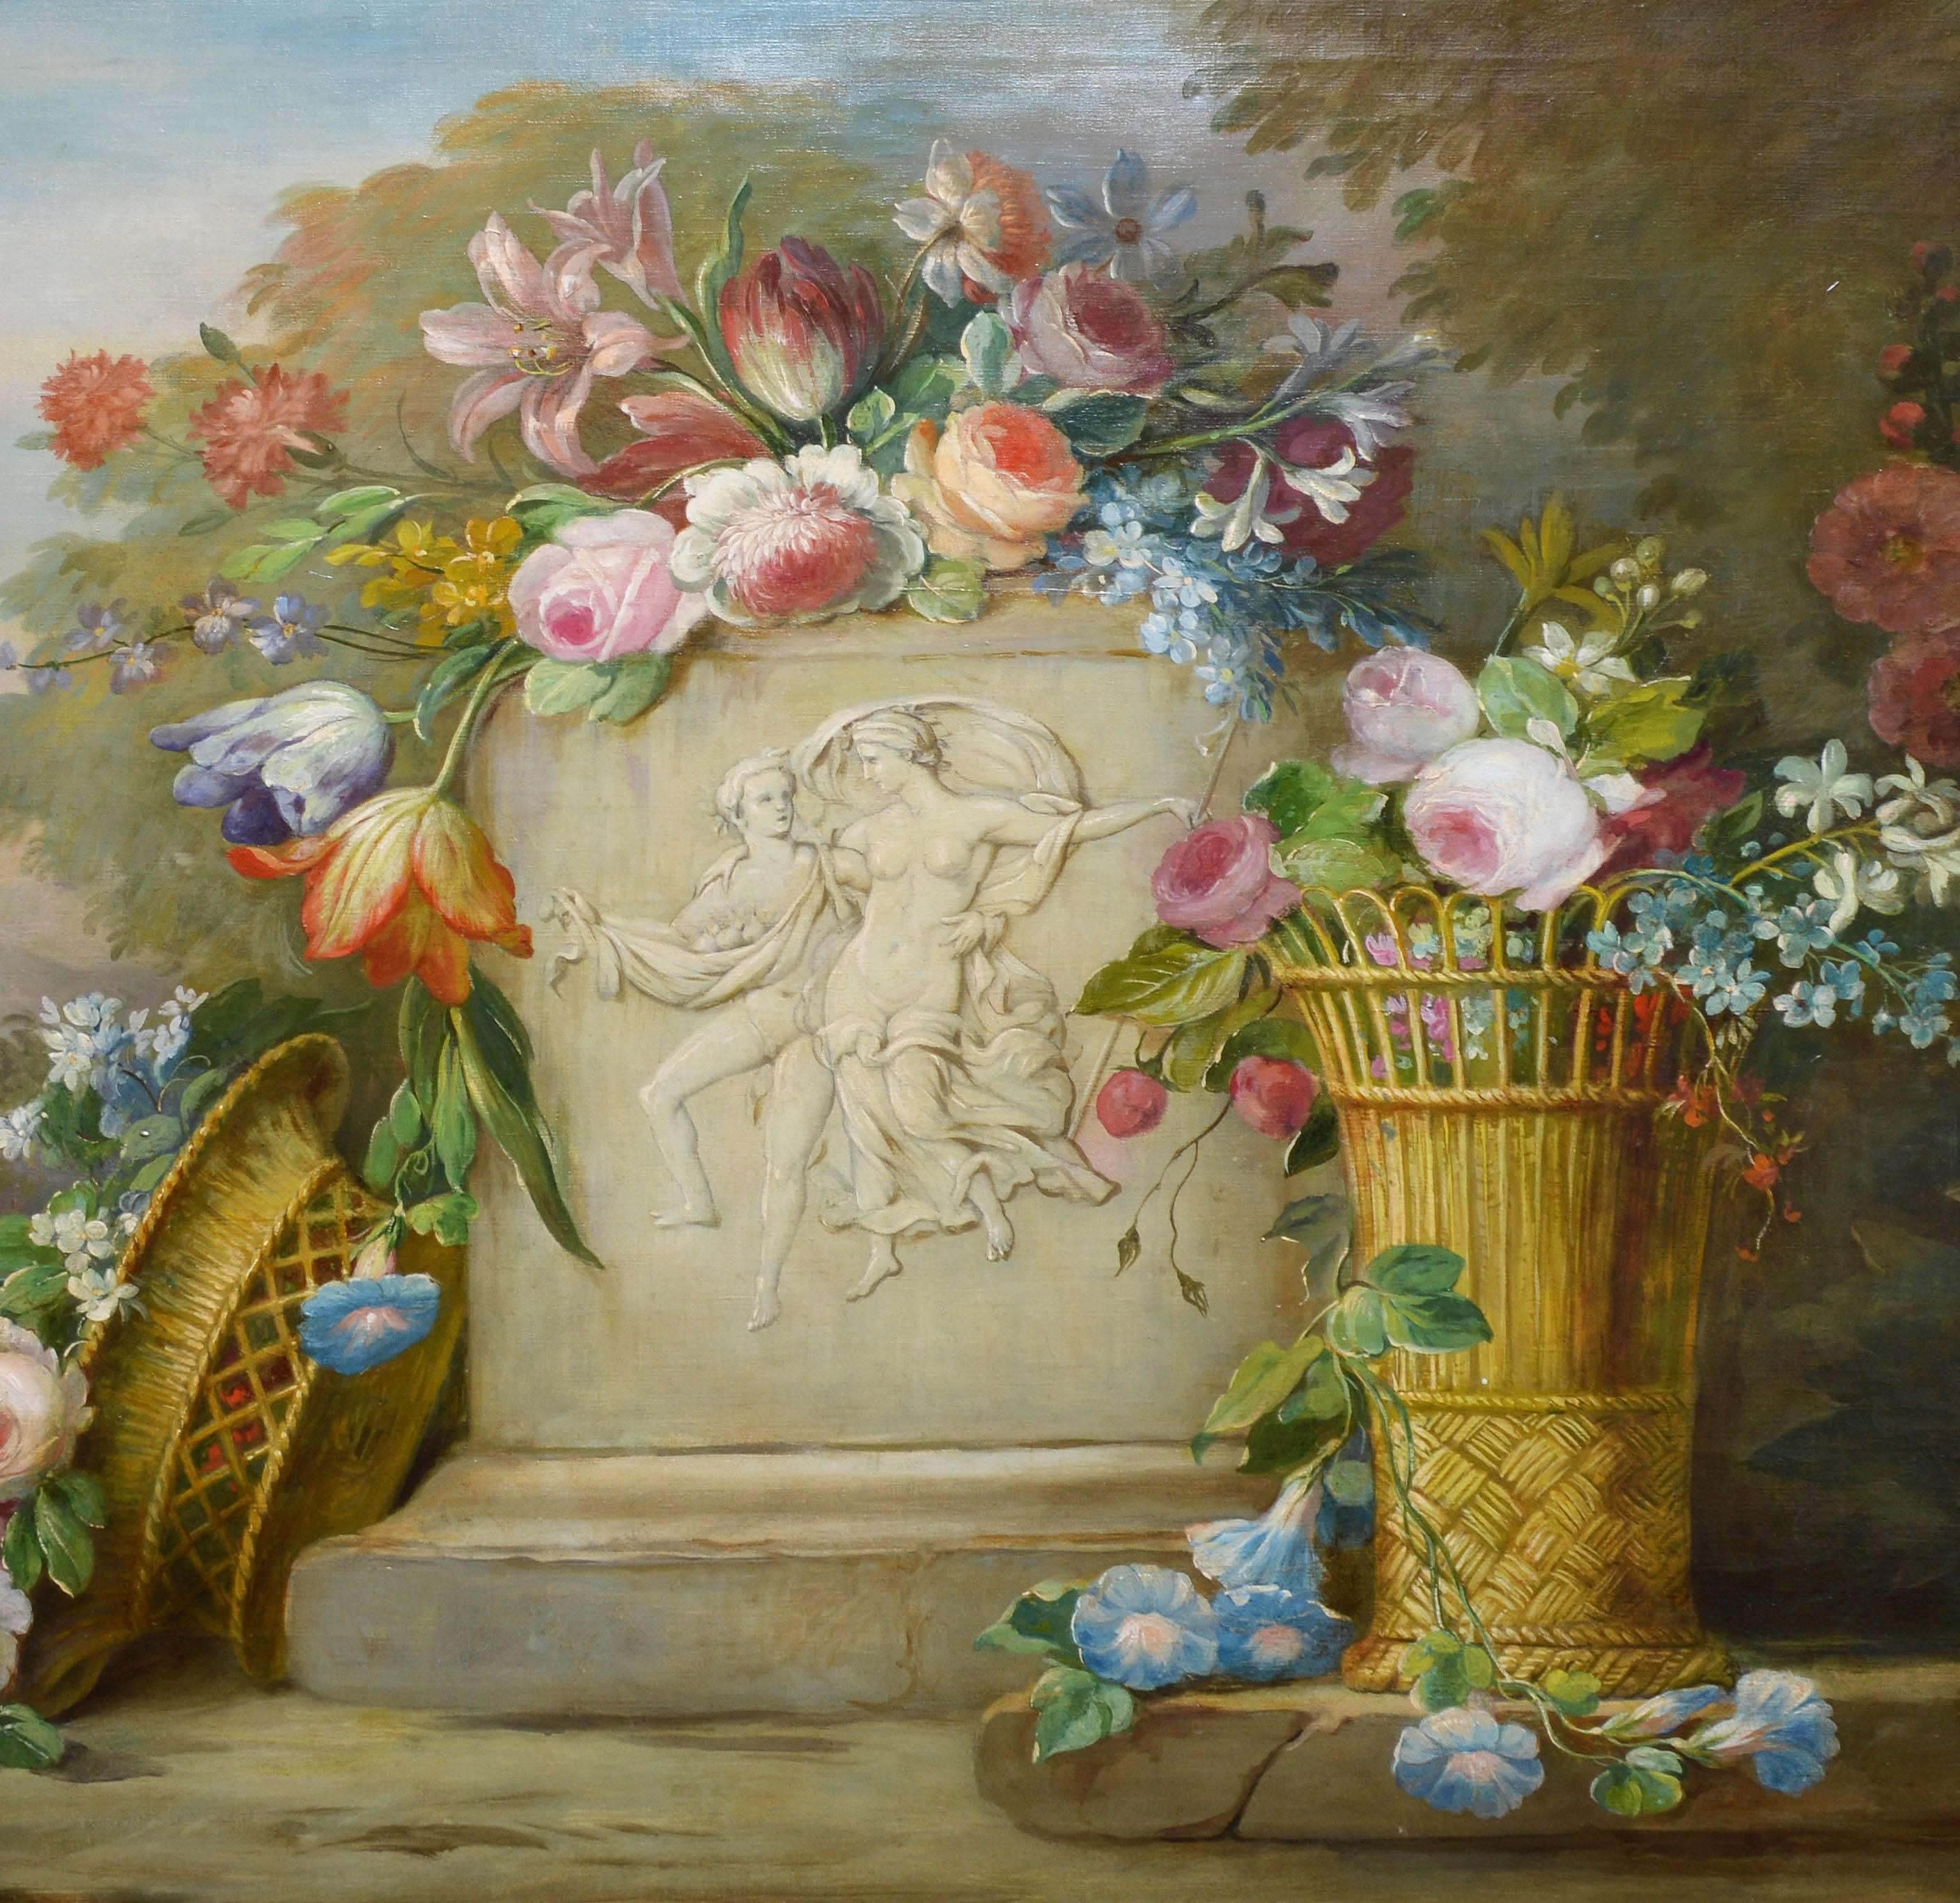 Large American School Flower Still Life and Landscape - Realist Painting by Unknown